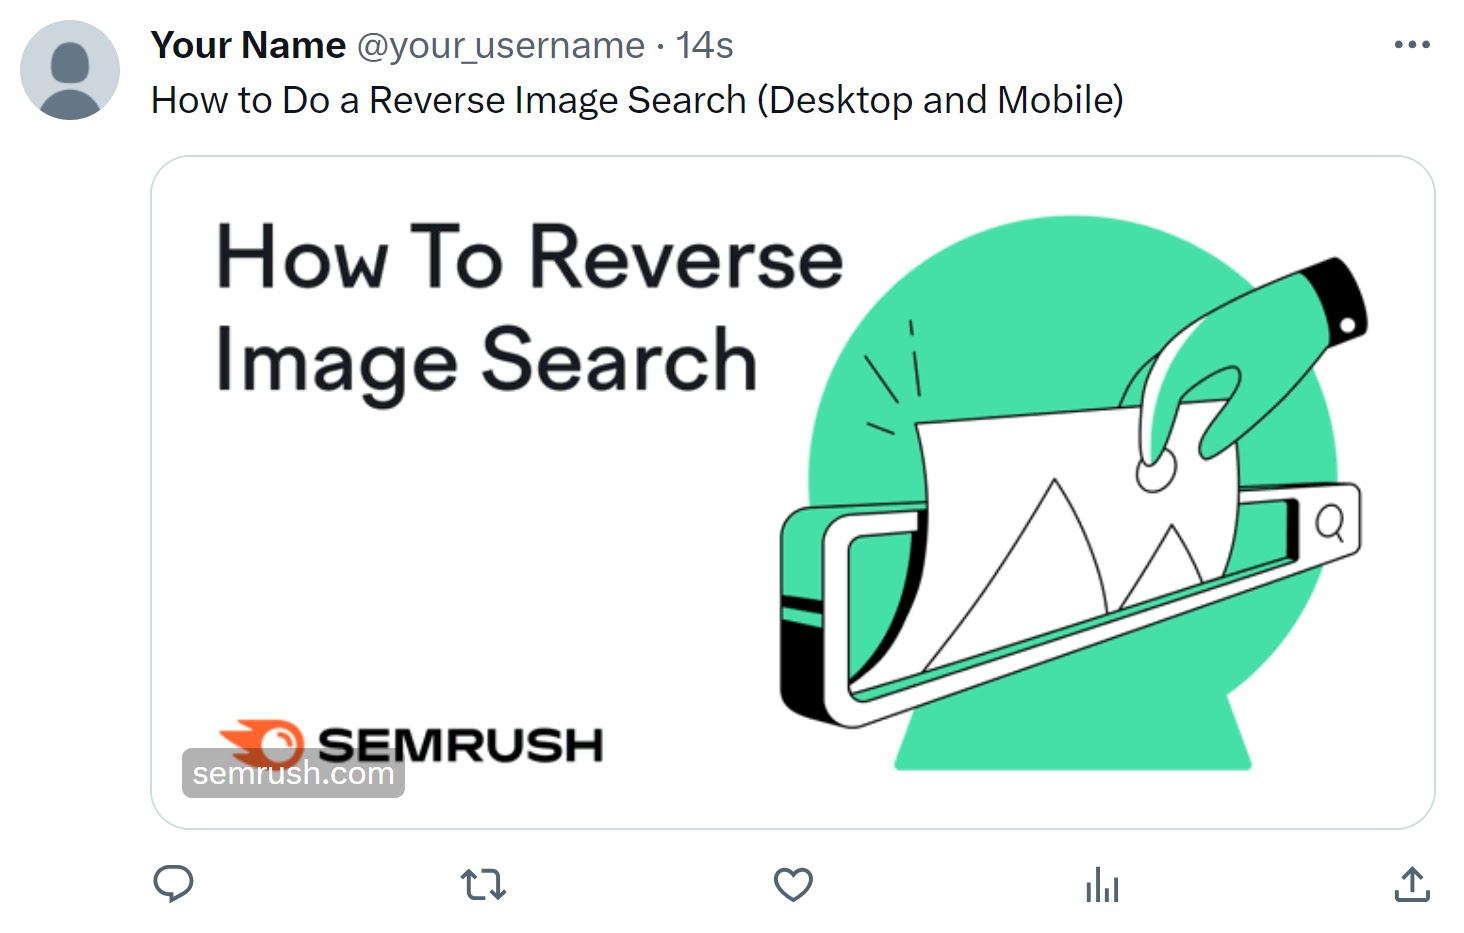 Semrush's article on "How To Reverse Image Search" appearing on X (formerly Twitter)